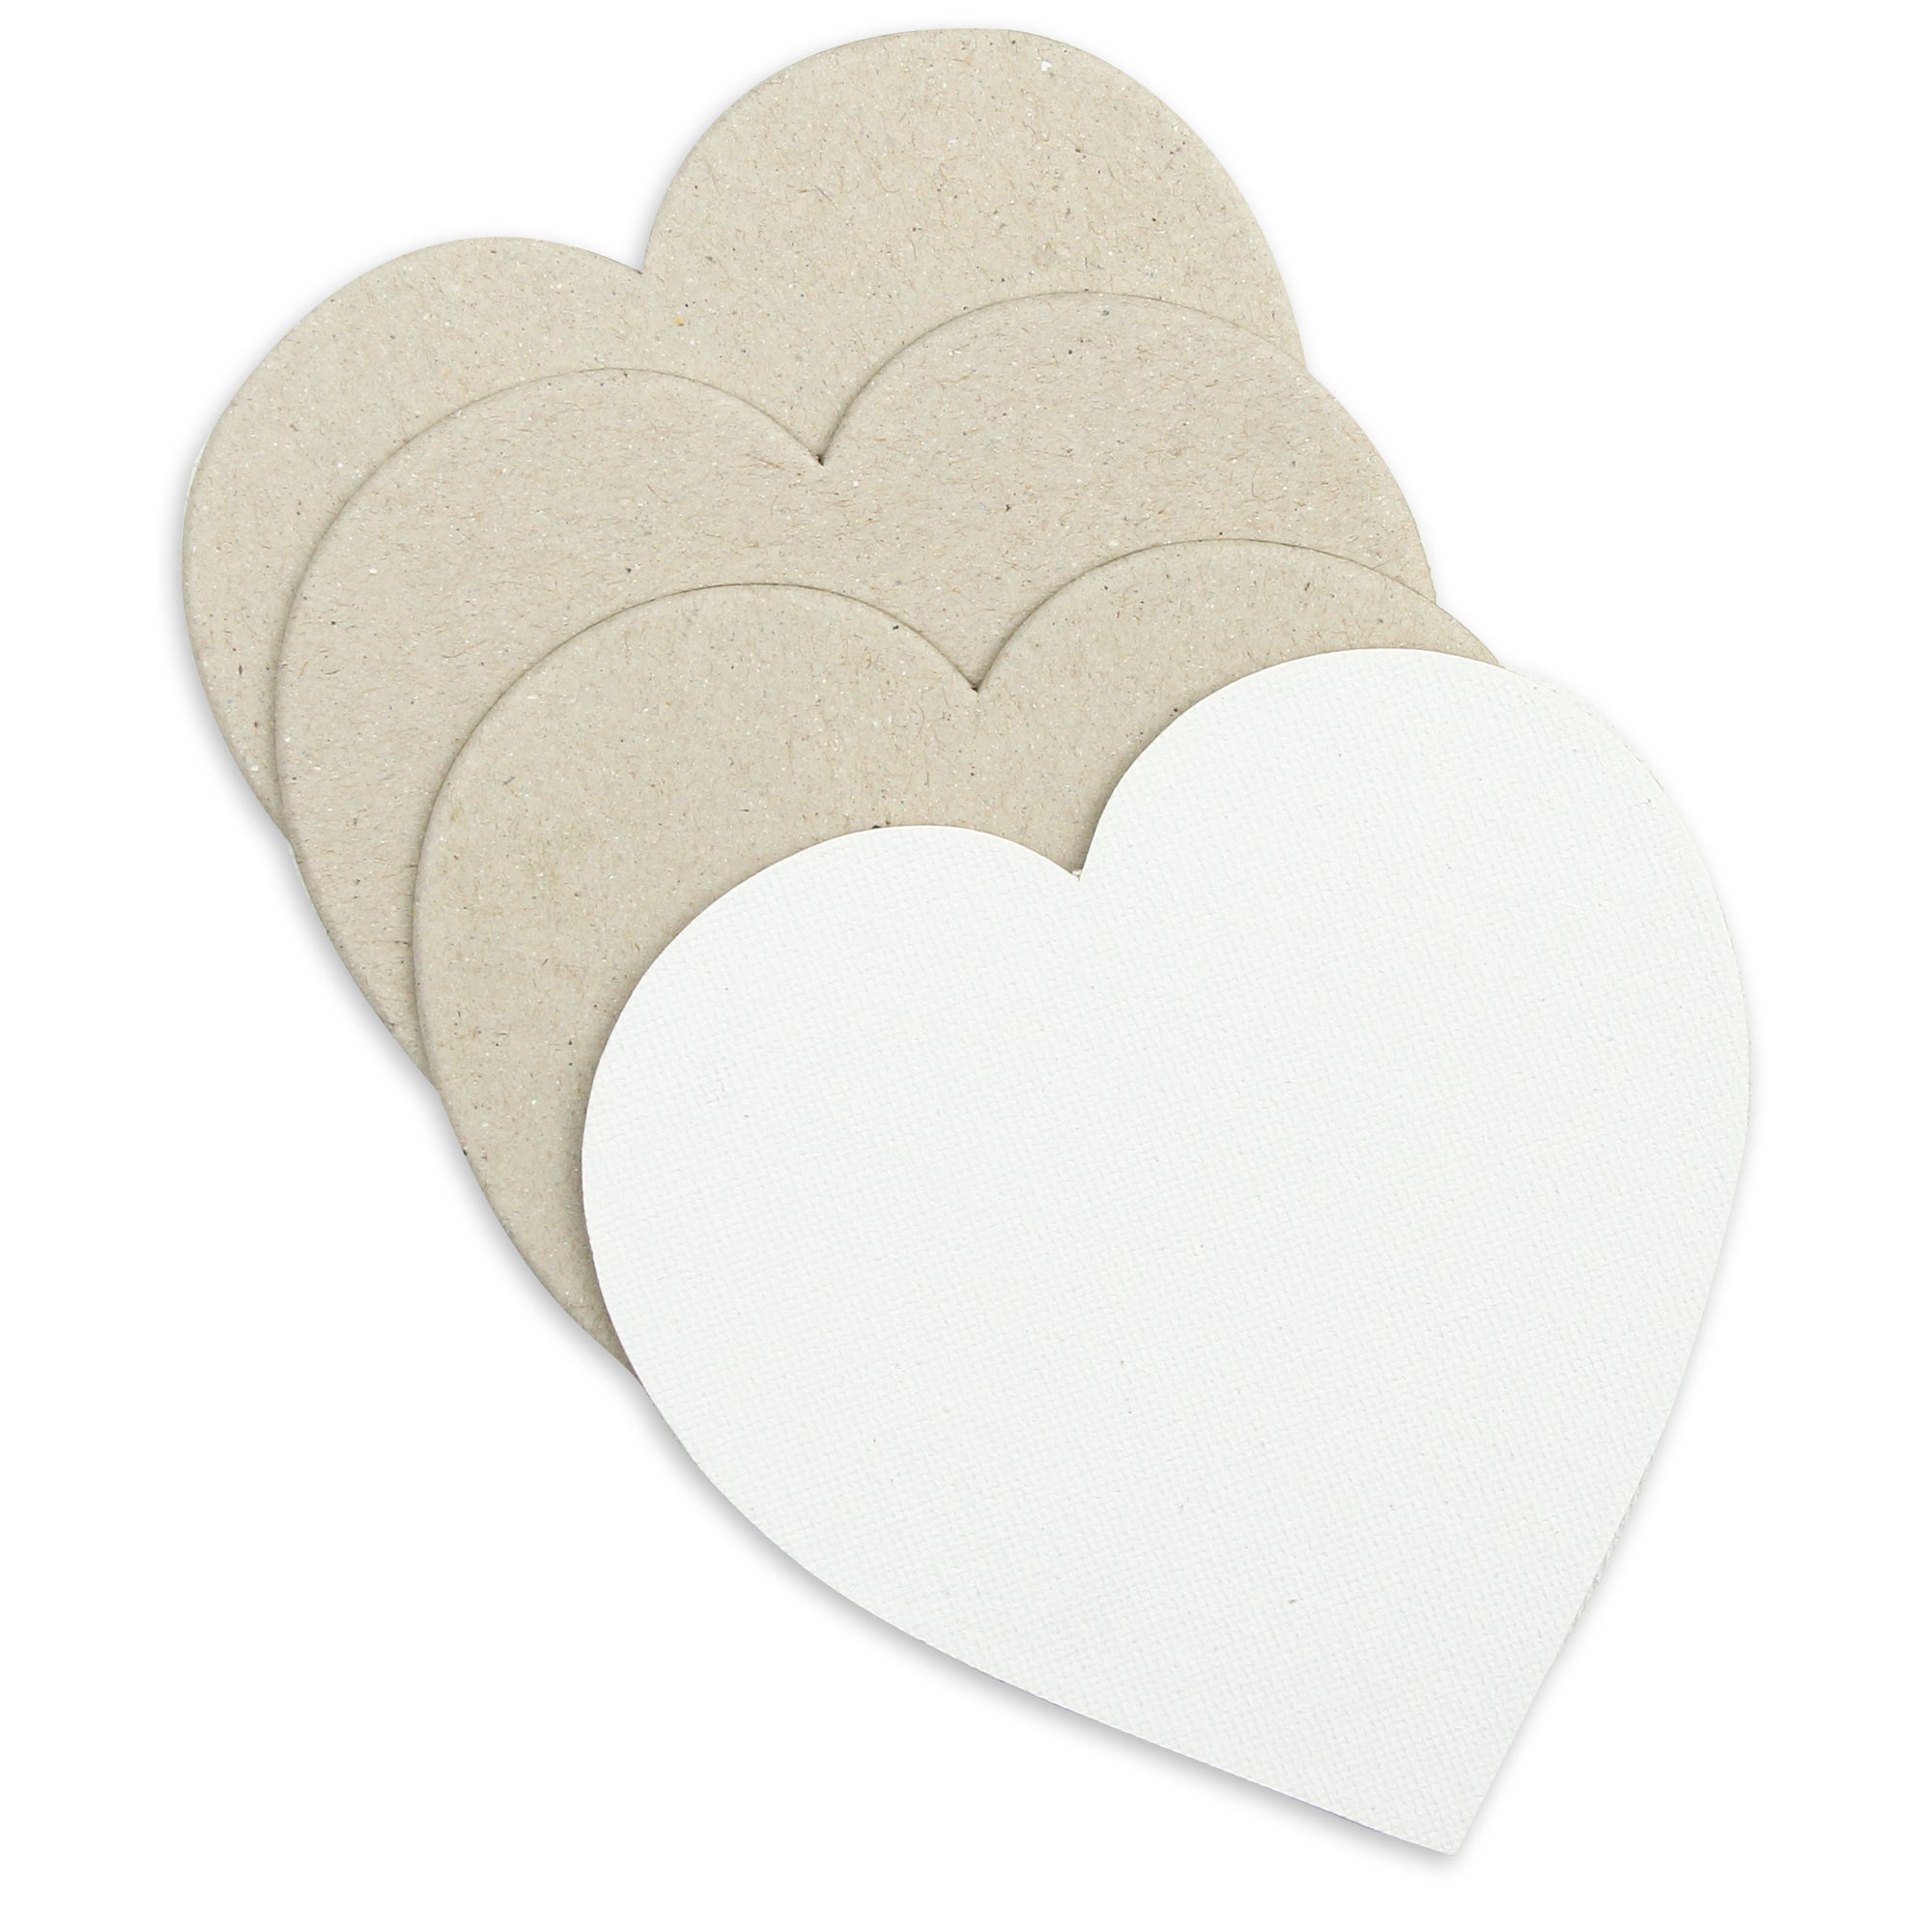 Canvas Board Heart 4 X 4Inch 230Gsm 2Mm Thick 4Pc Shrink Lb